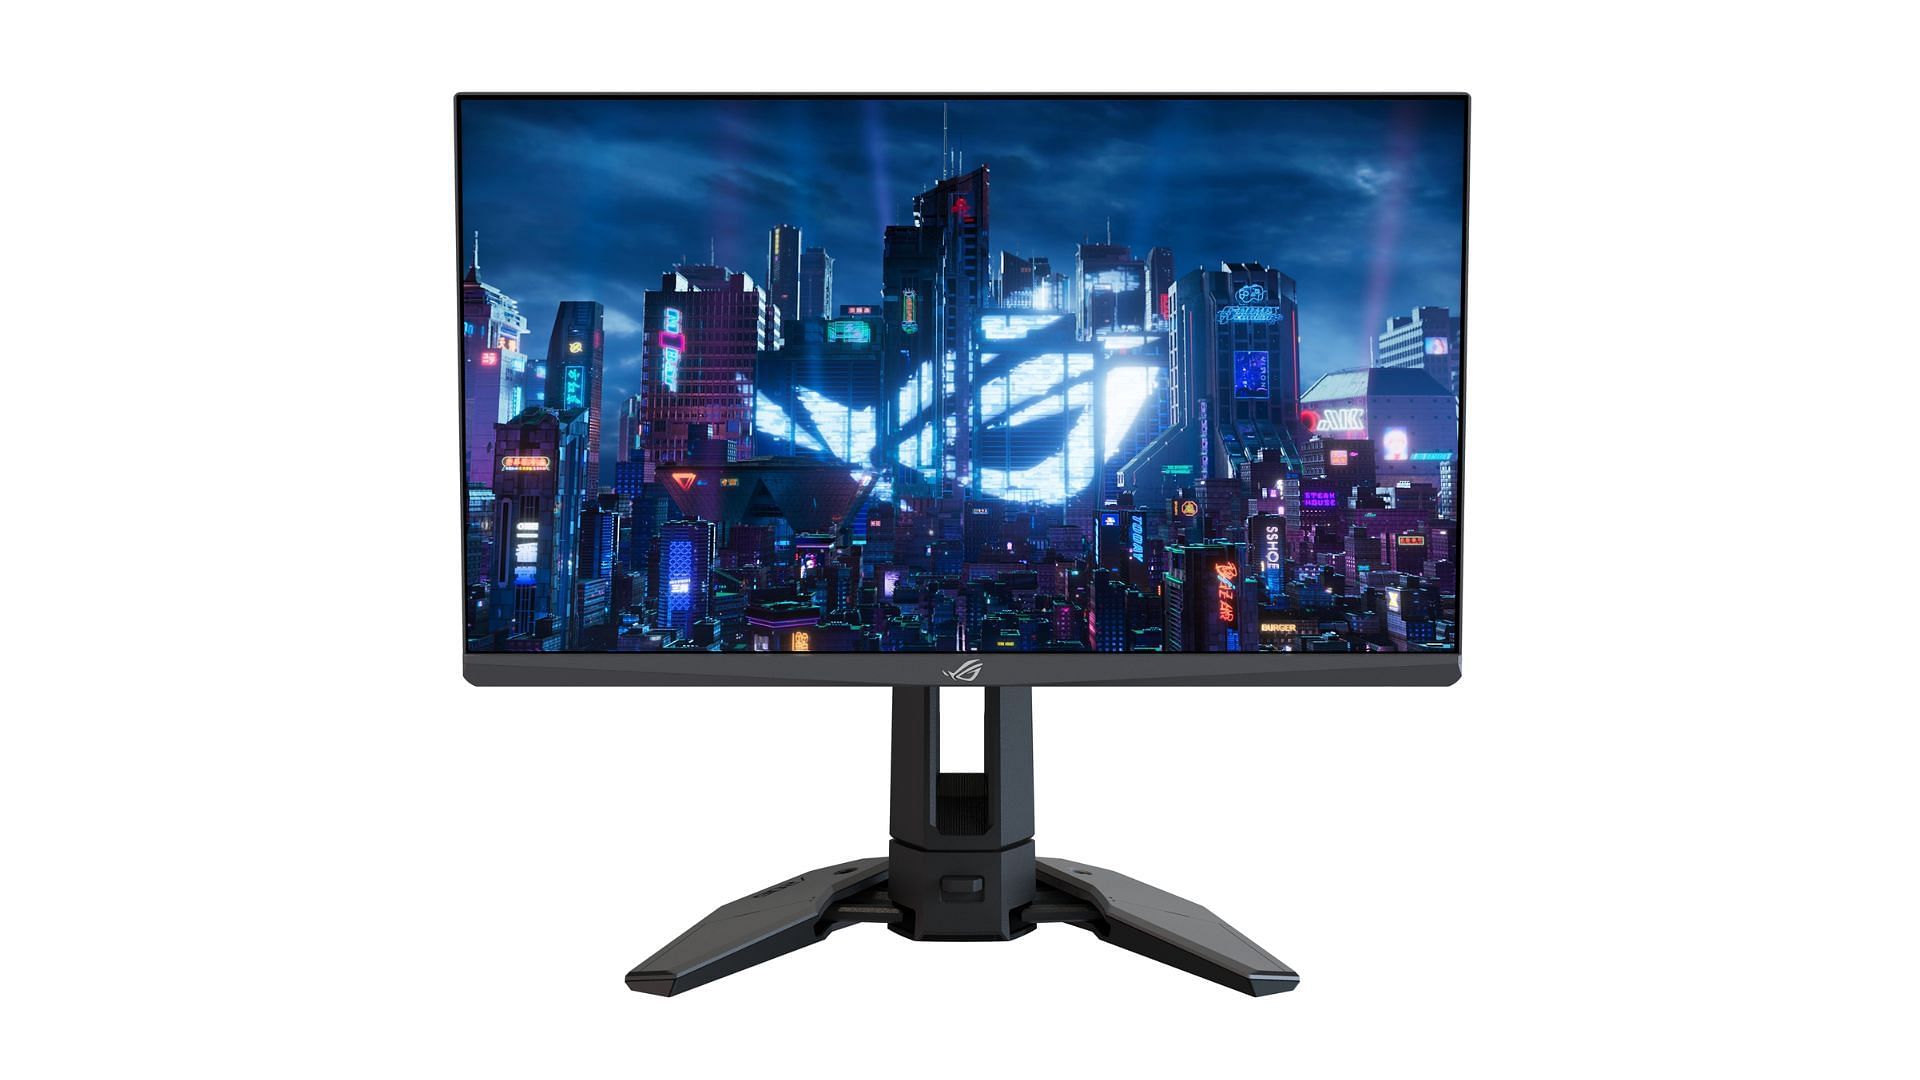 The Asus Swift Pro PG248QP 24-inch Full HD 540 Hz monitor (Image via Asus)